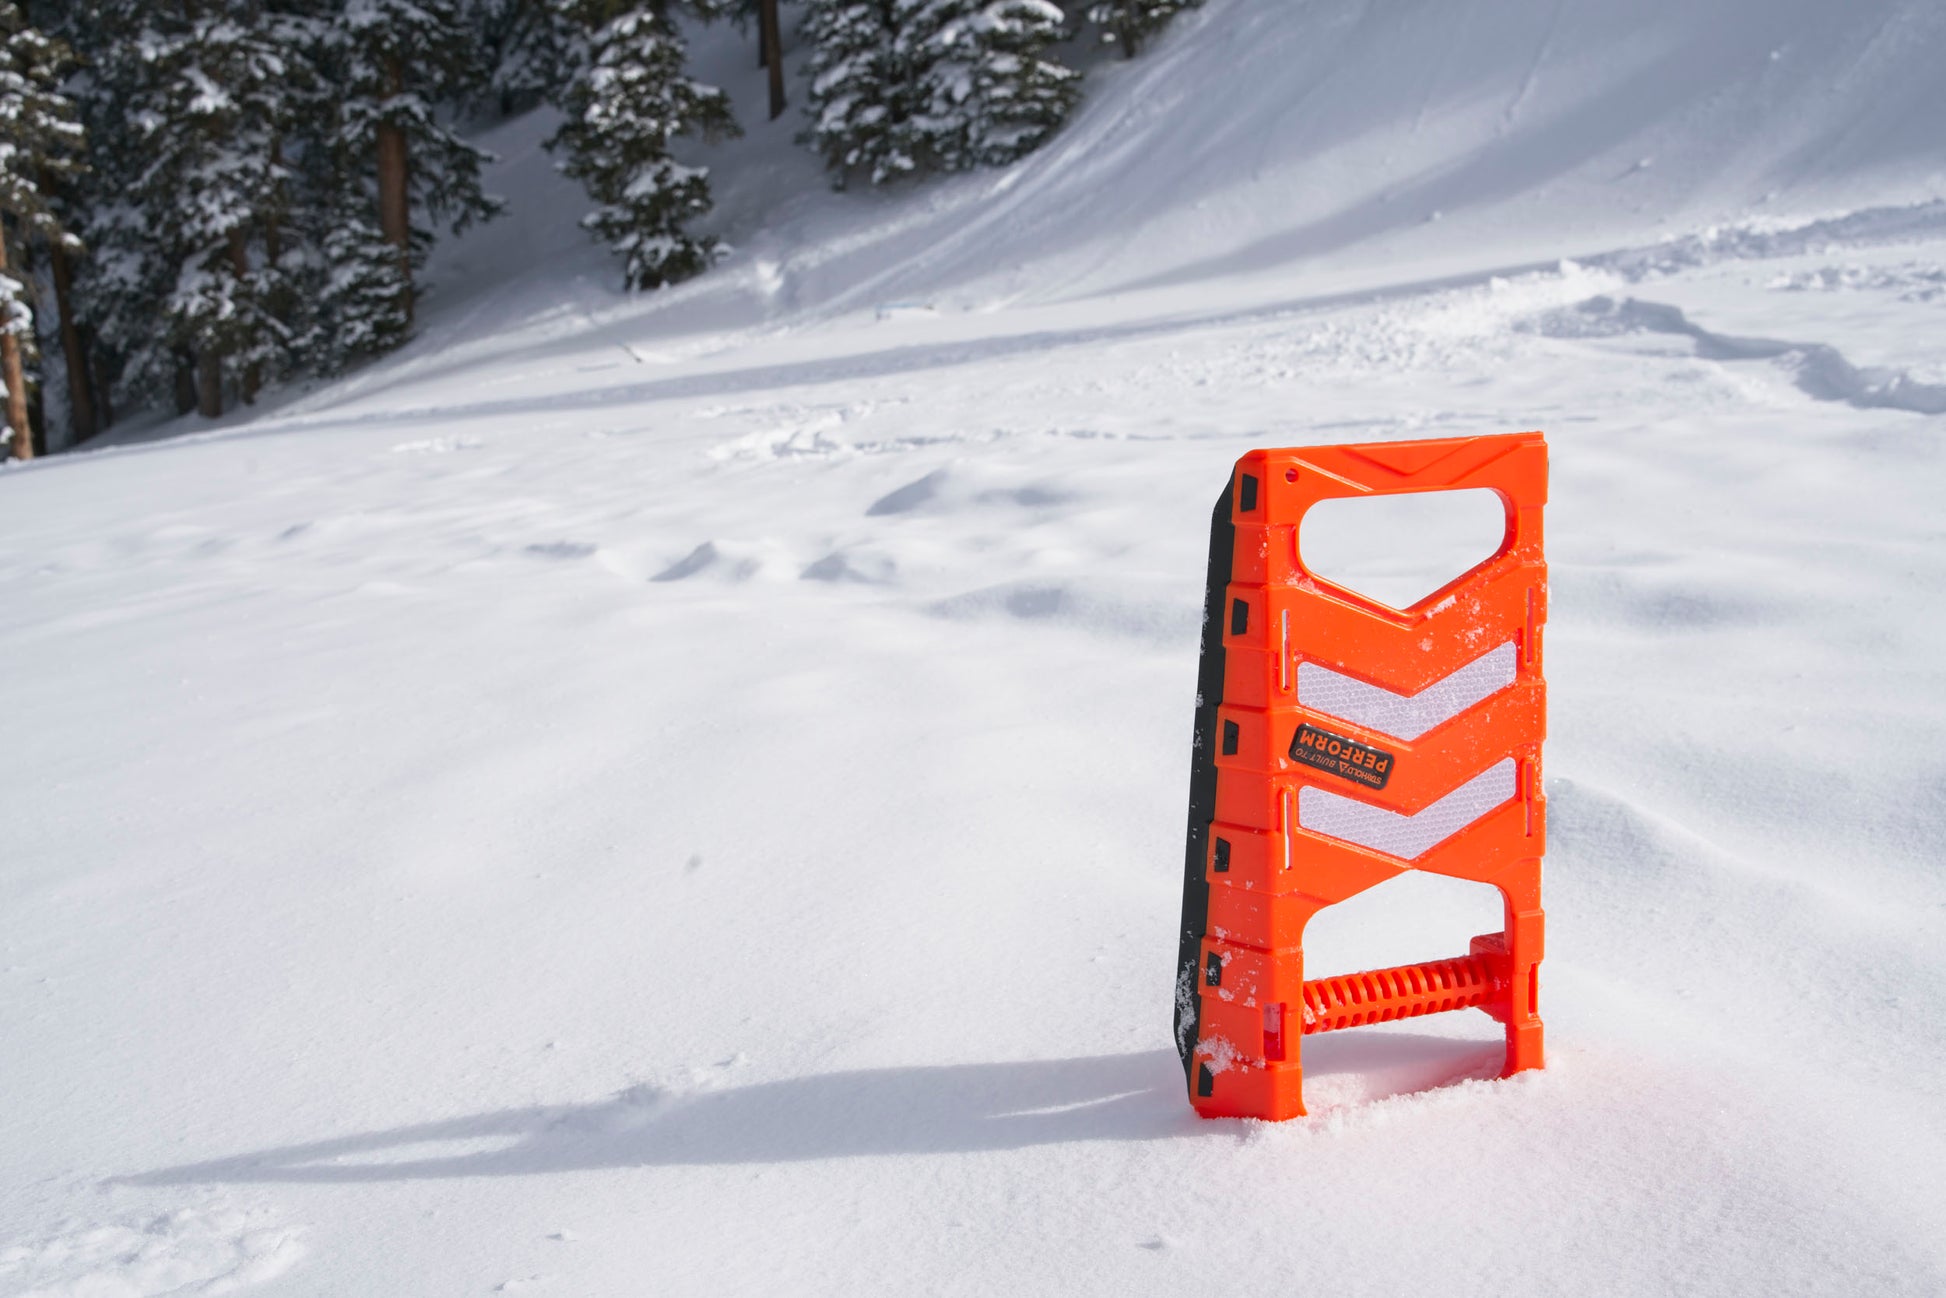 Stayhold Compact Safety Shovel stuck into the snow